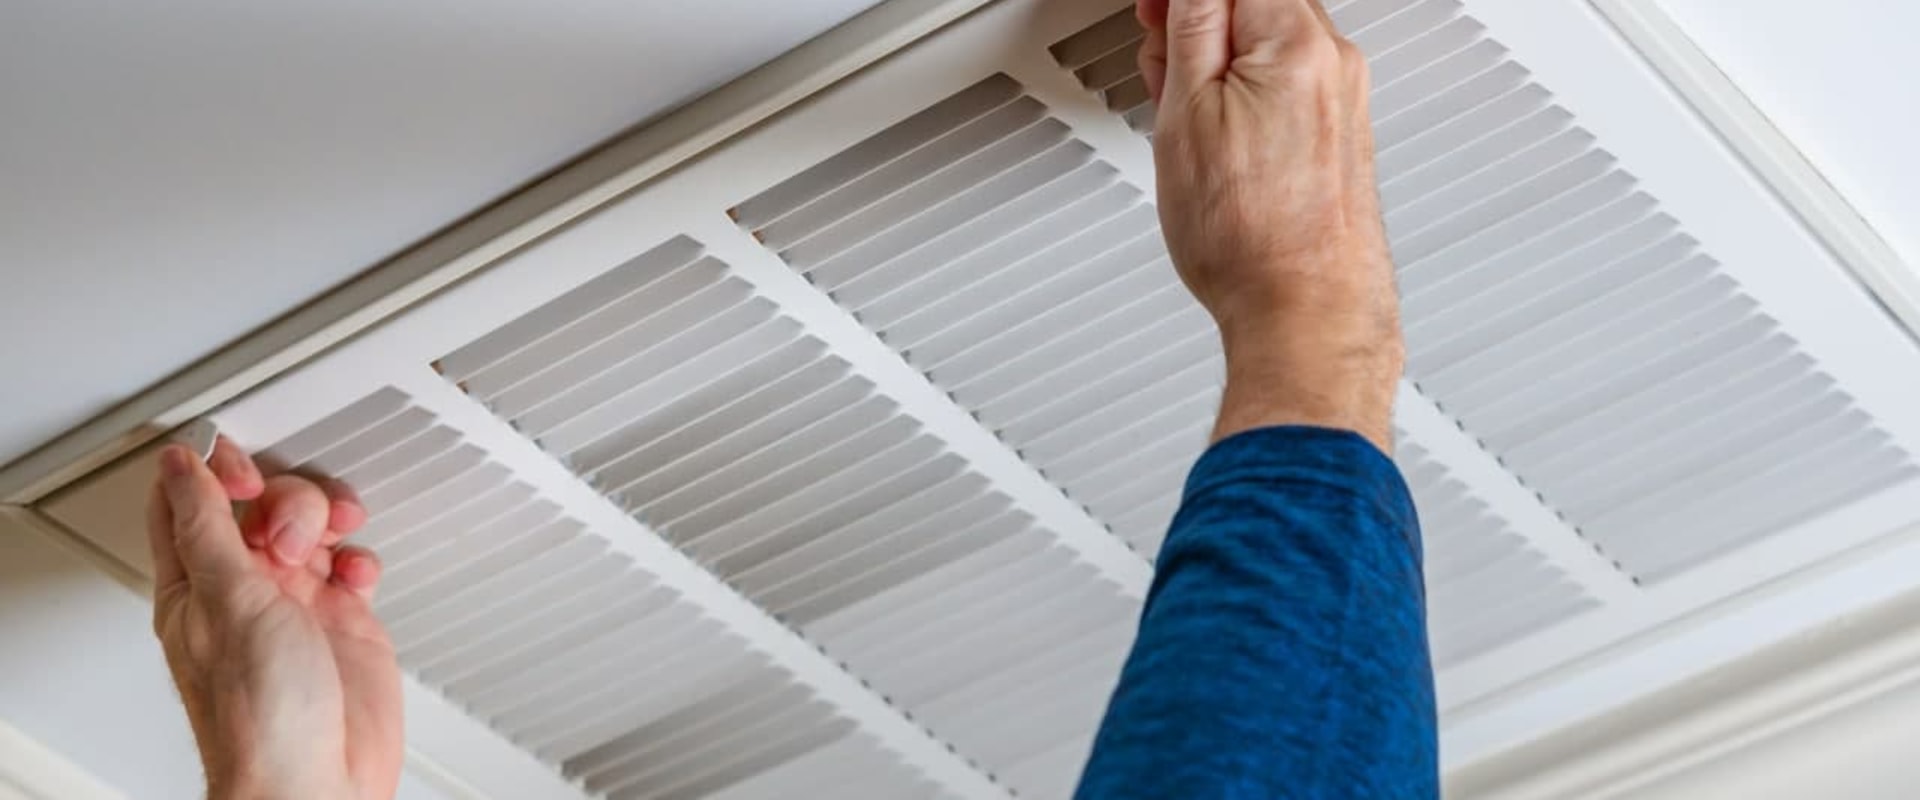 Which Air Filter is Better: 1 Inch or 2 Inch?